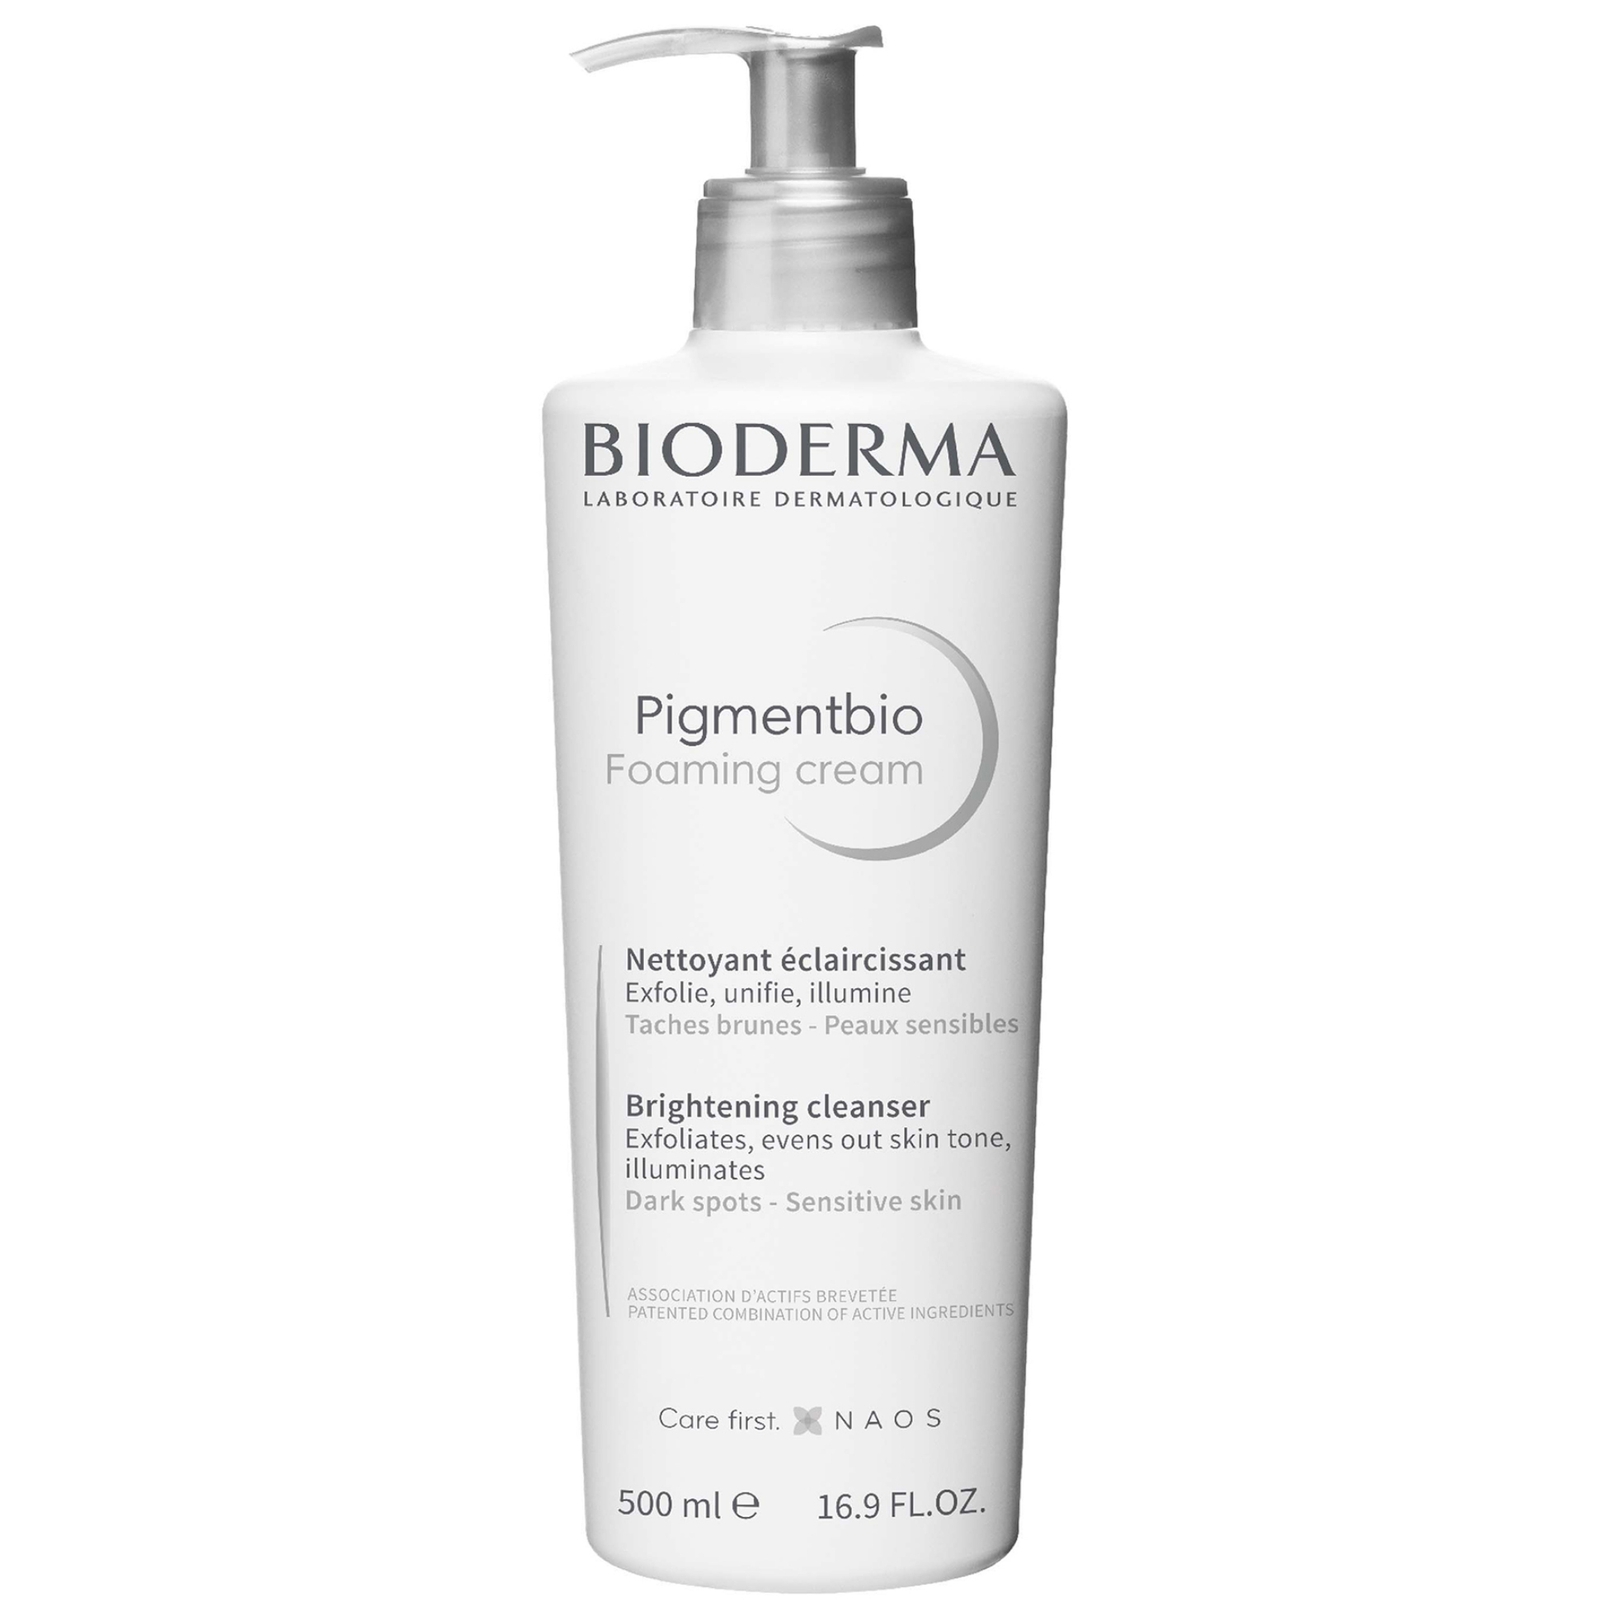 Photos - Facial / Body Cleansing Product Bioderma Pigmentbio Brightening and Exfoliating Cleanser 500ml 28914B 